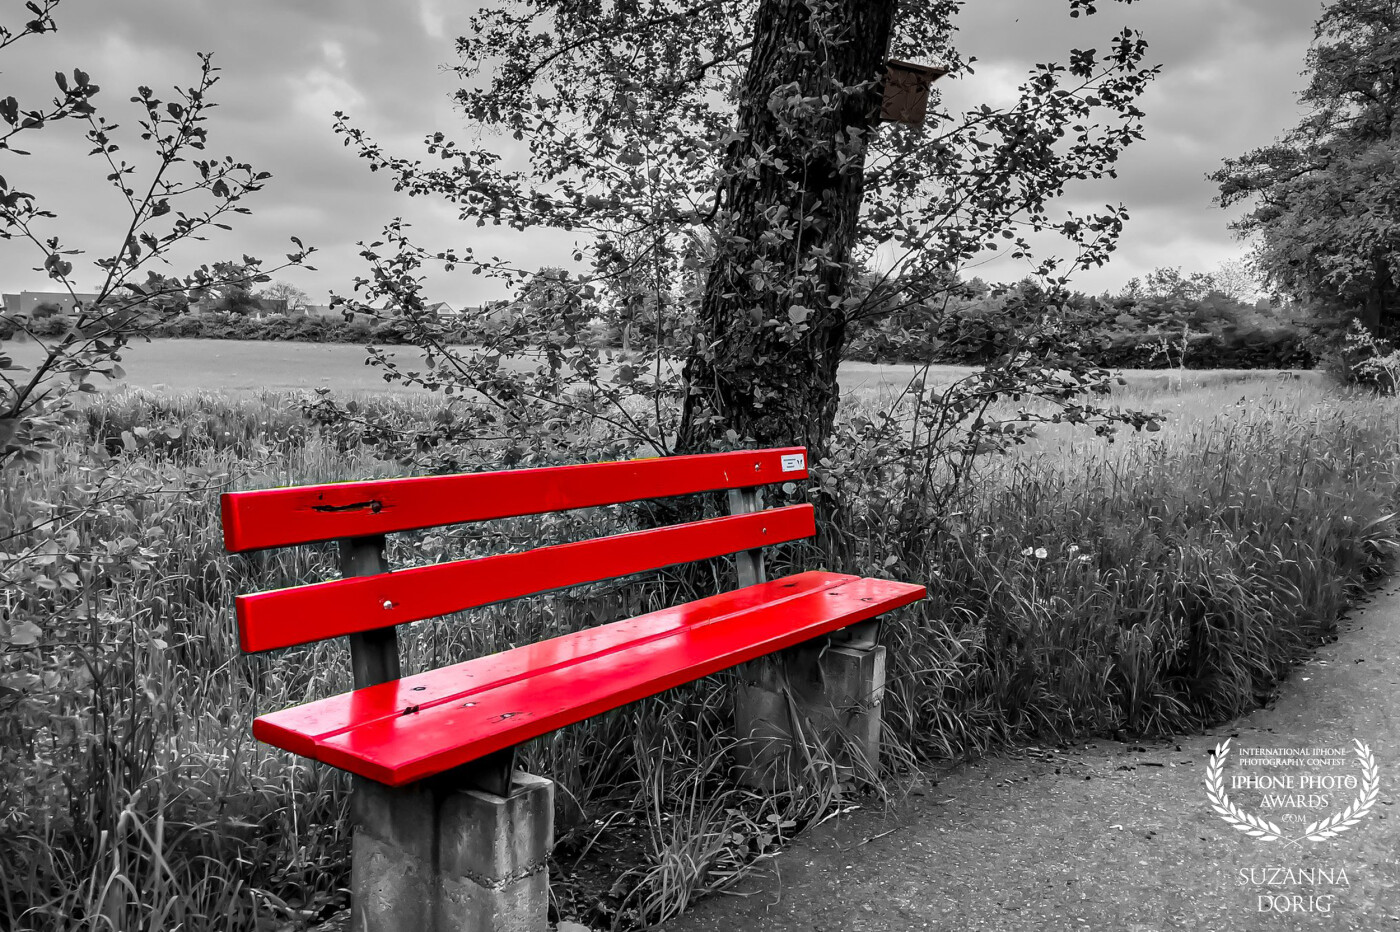 All over the village where we’re leaving, you’ll find these wonderful red benches. They seem to invite you to having a seat, take a breath and just relax while you’re listening to the bird’s song.